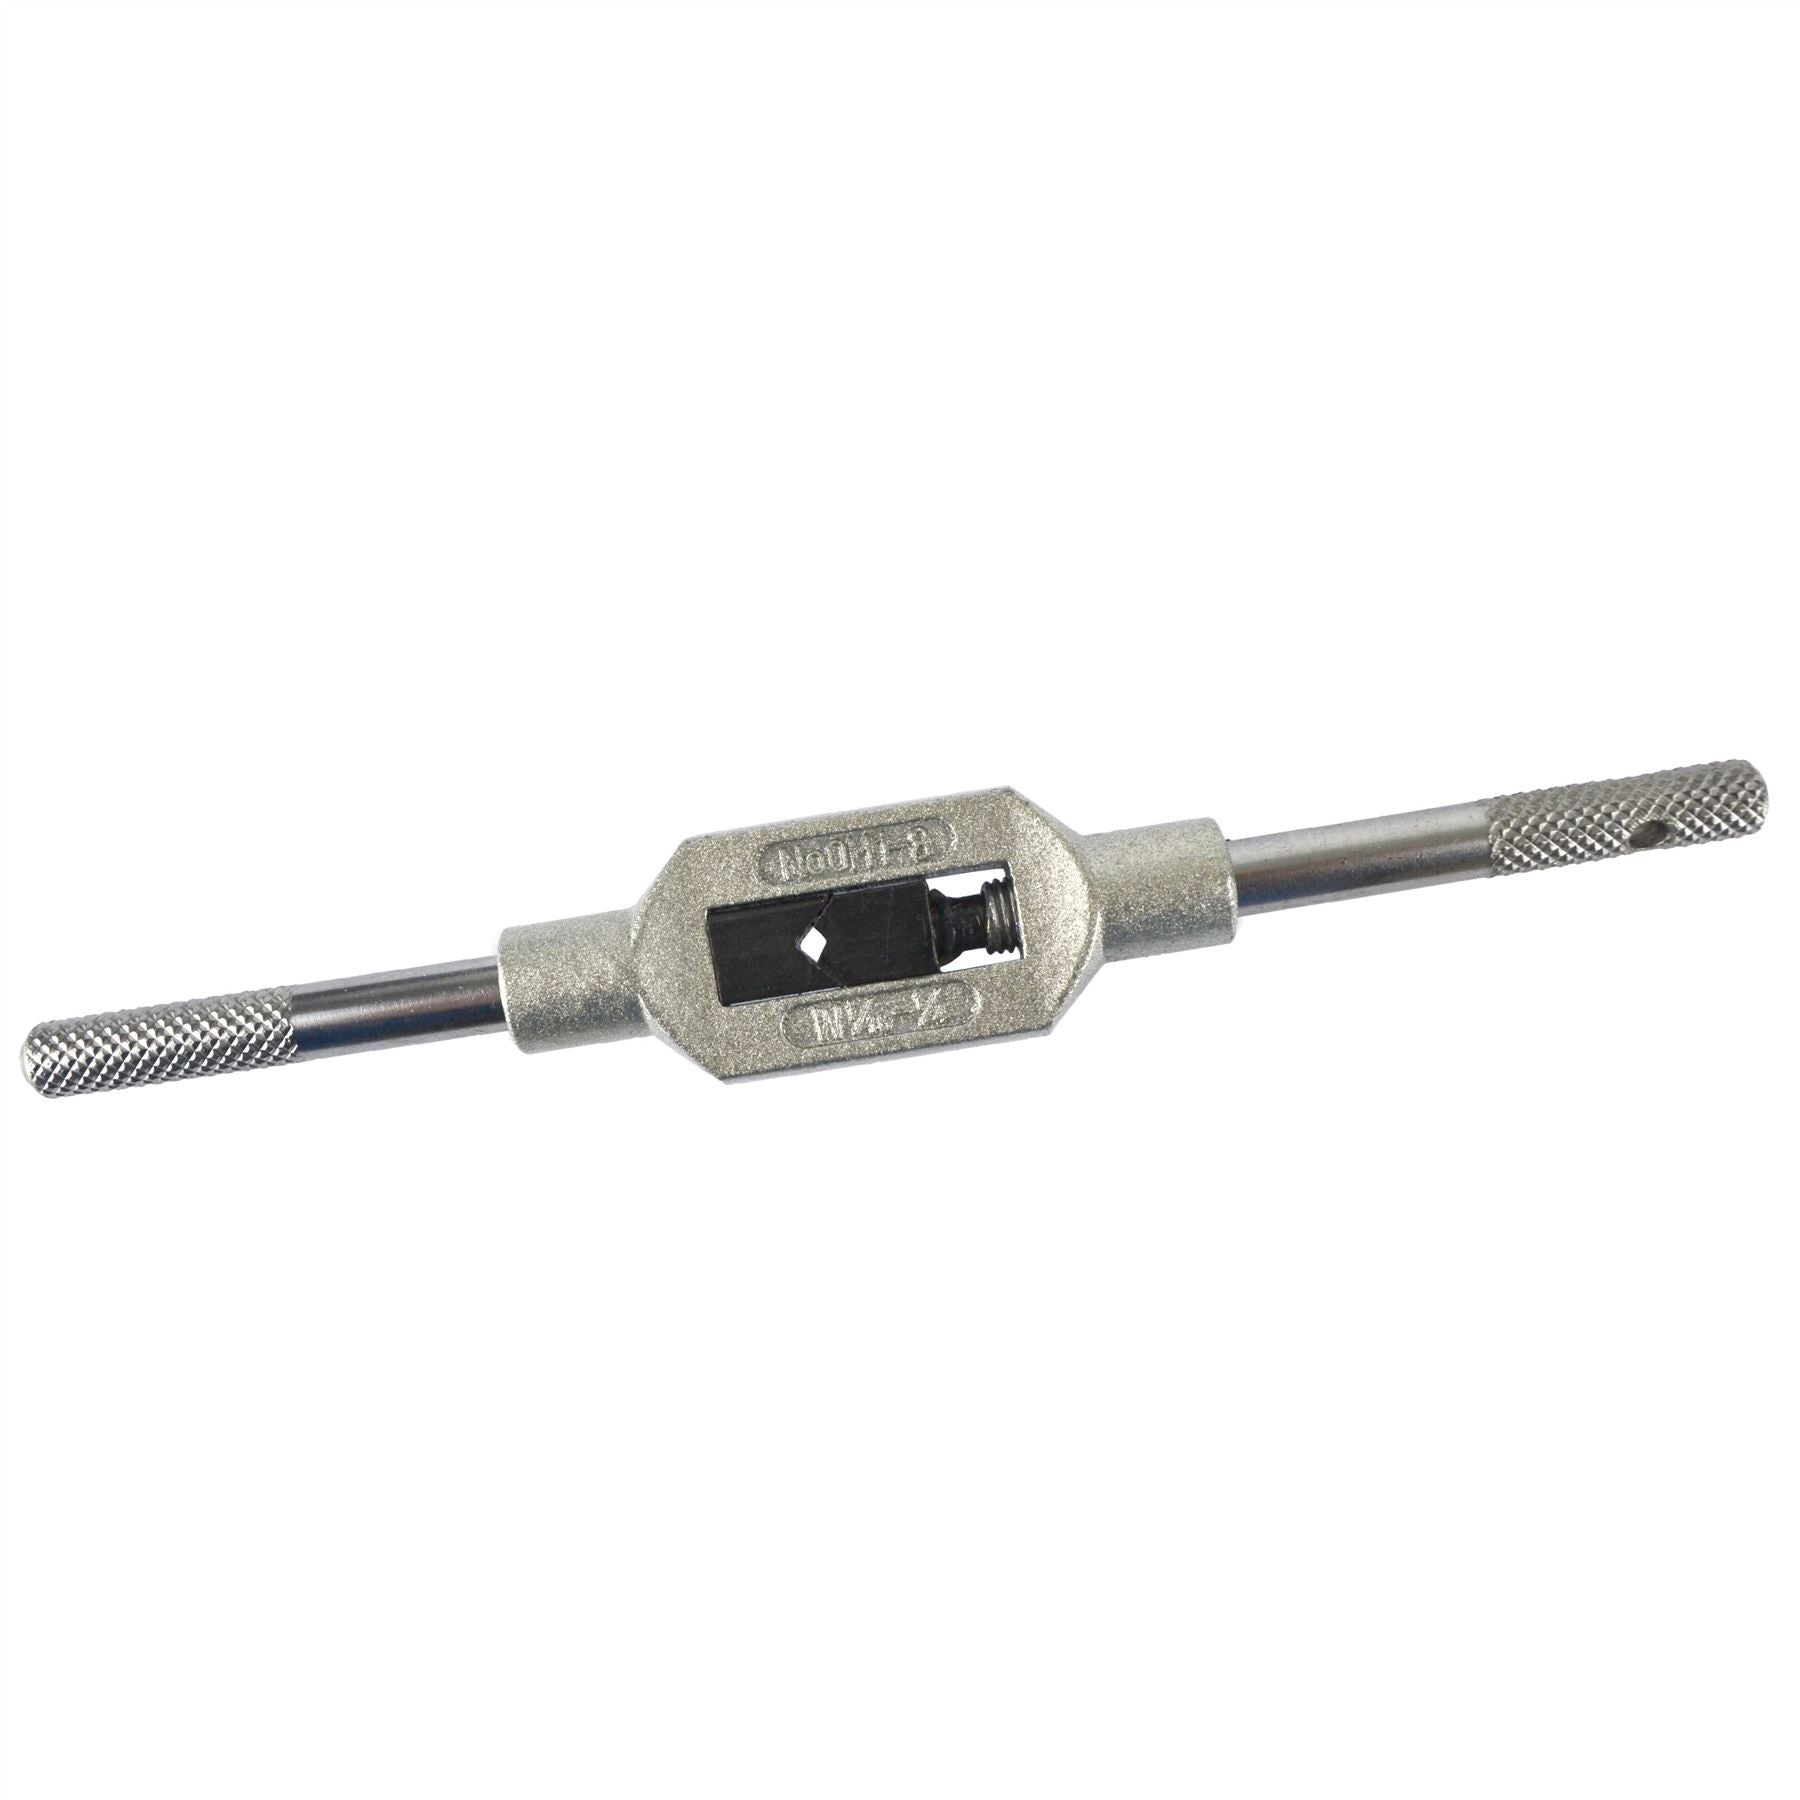 Tap Wrench Fully Adjustable M4 - M12 / 3/16" - 1/2" Tap And Die Re-thread AT304